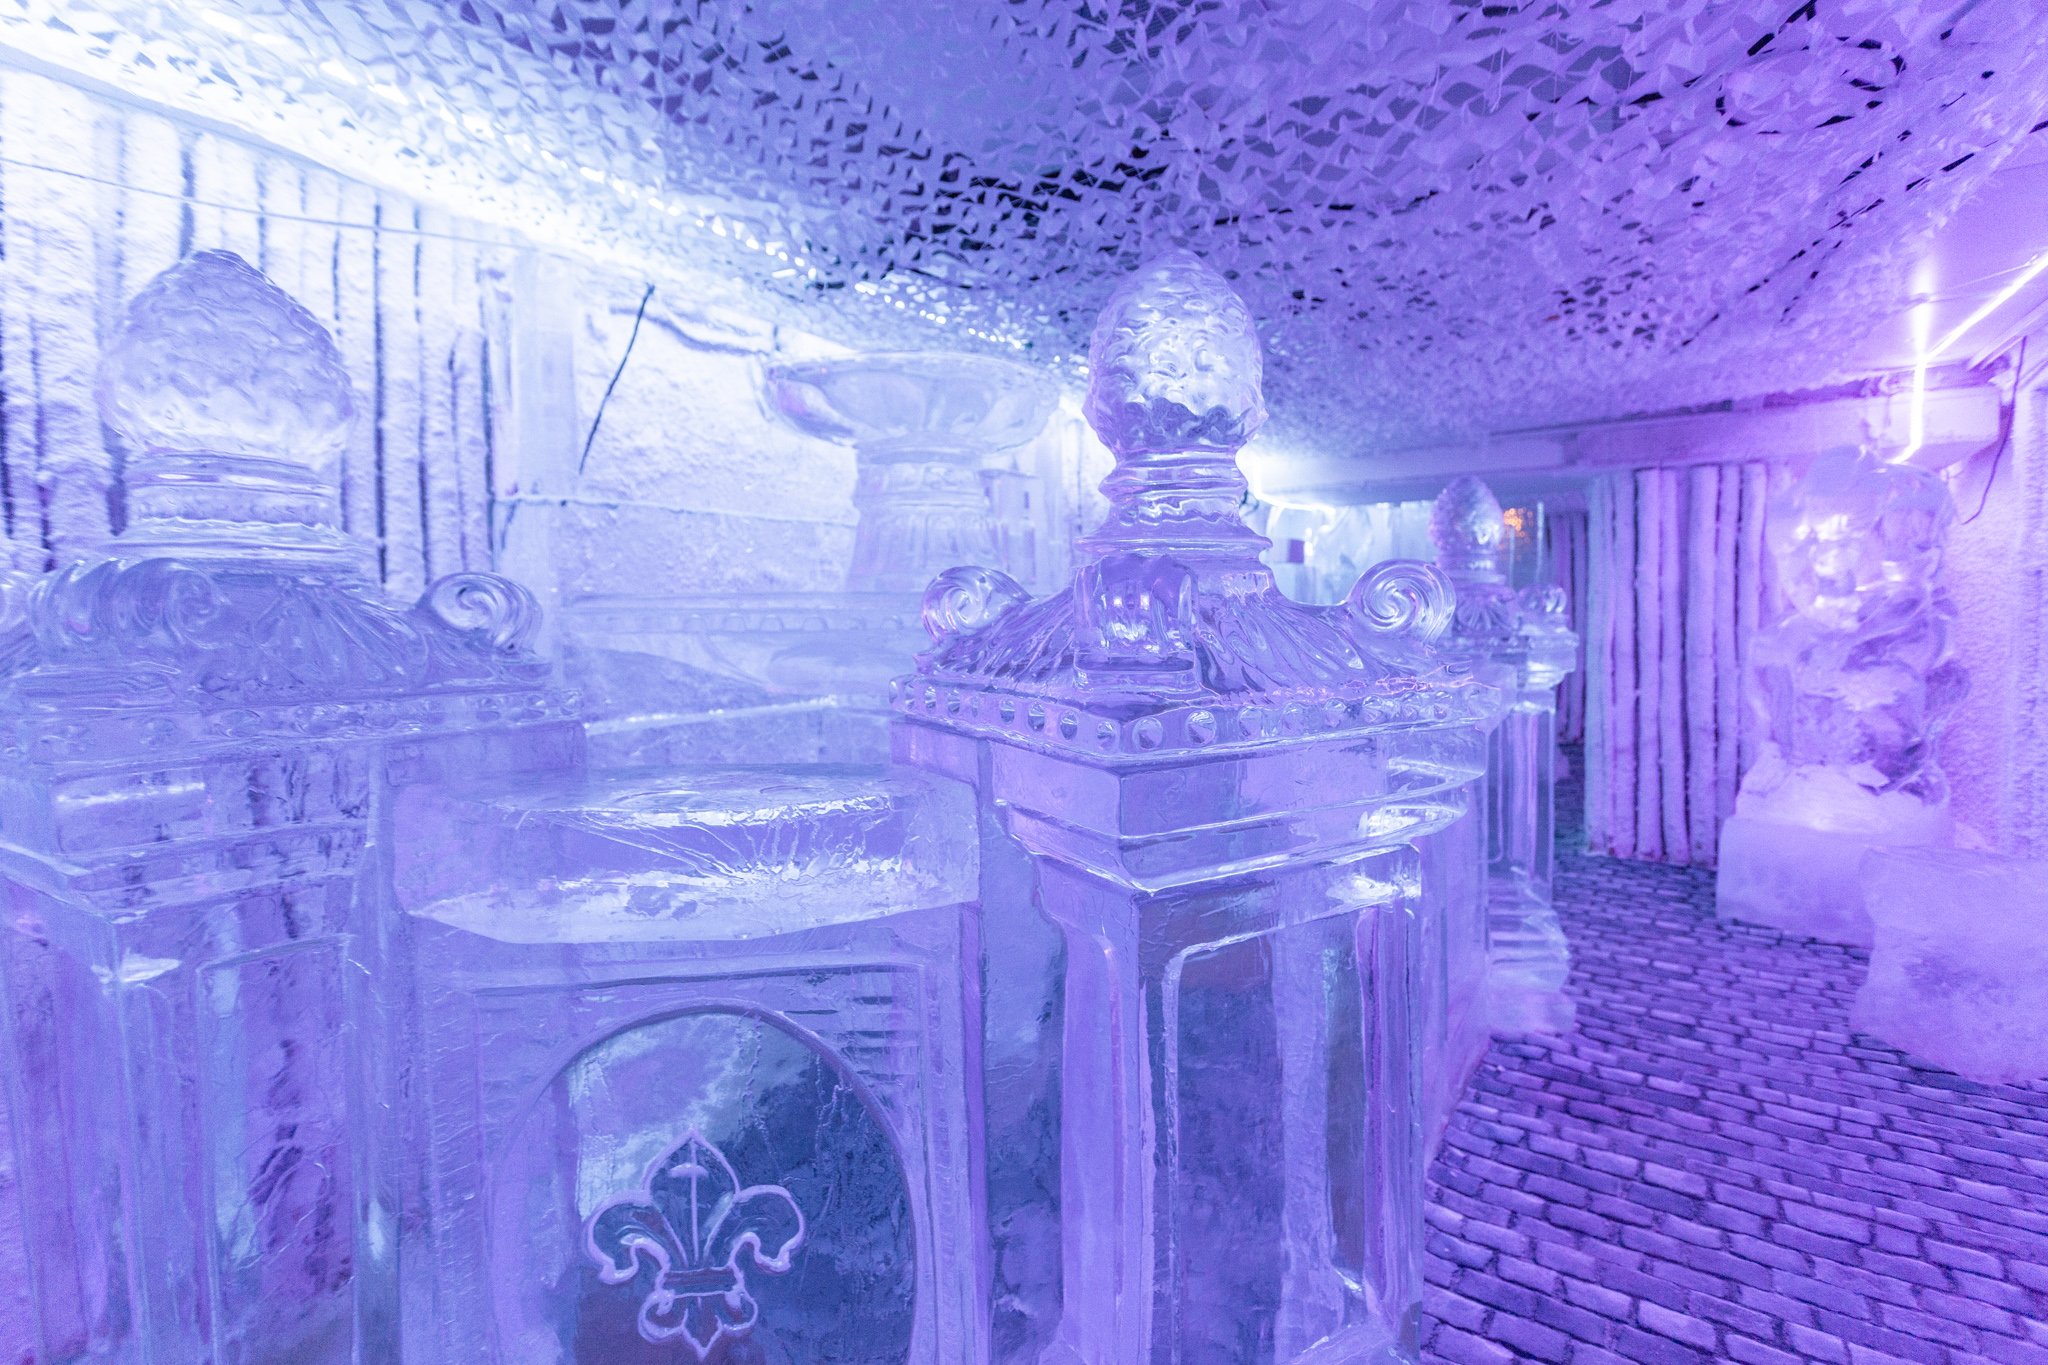 Ice Bar Paris-Experience-Kube Hotel-Montmartre-Going out in Paris